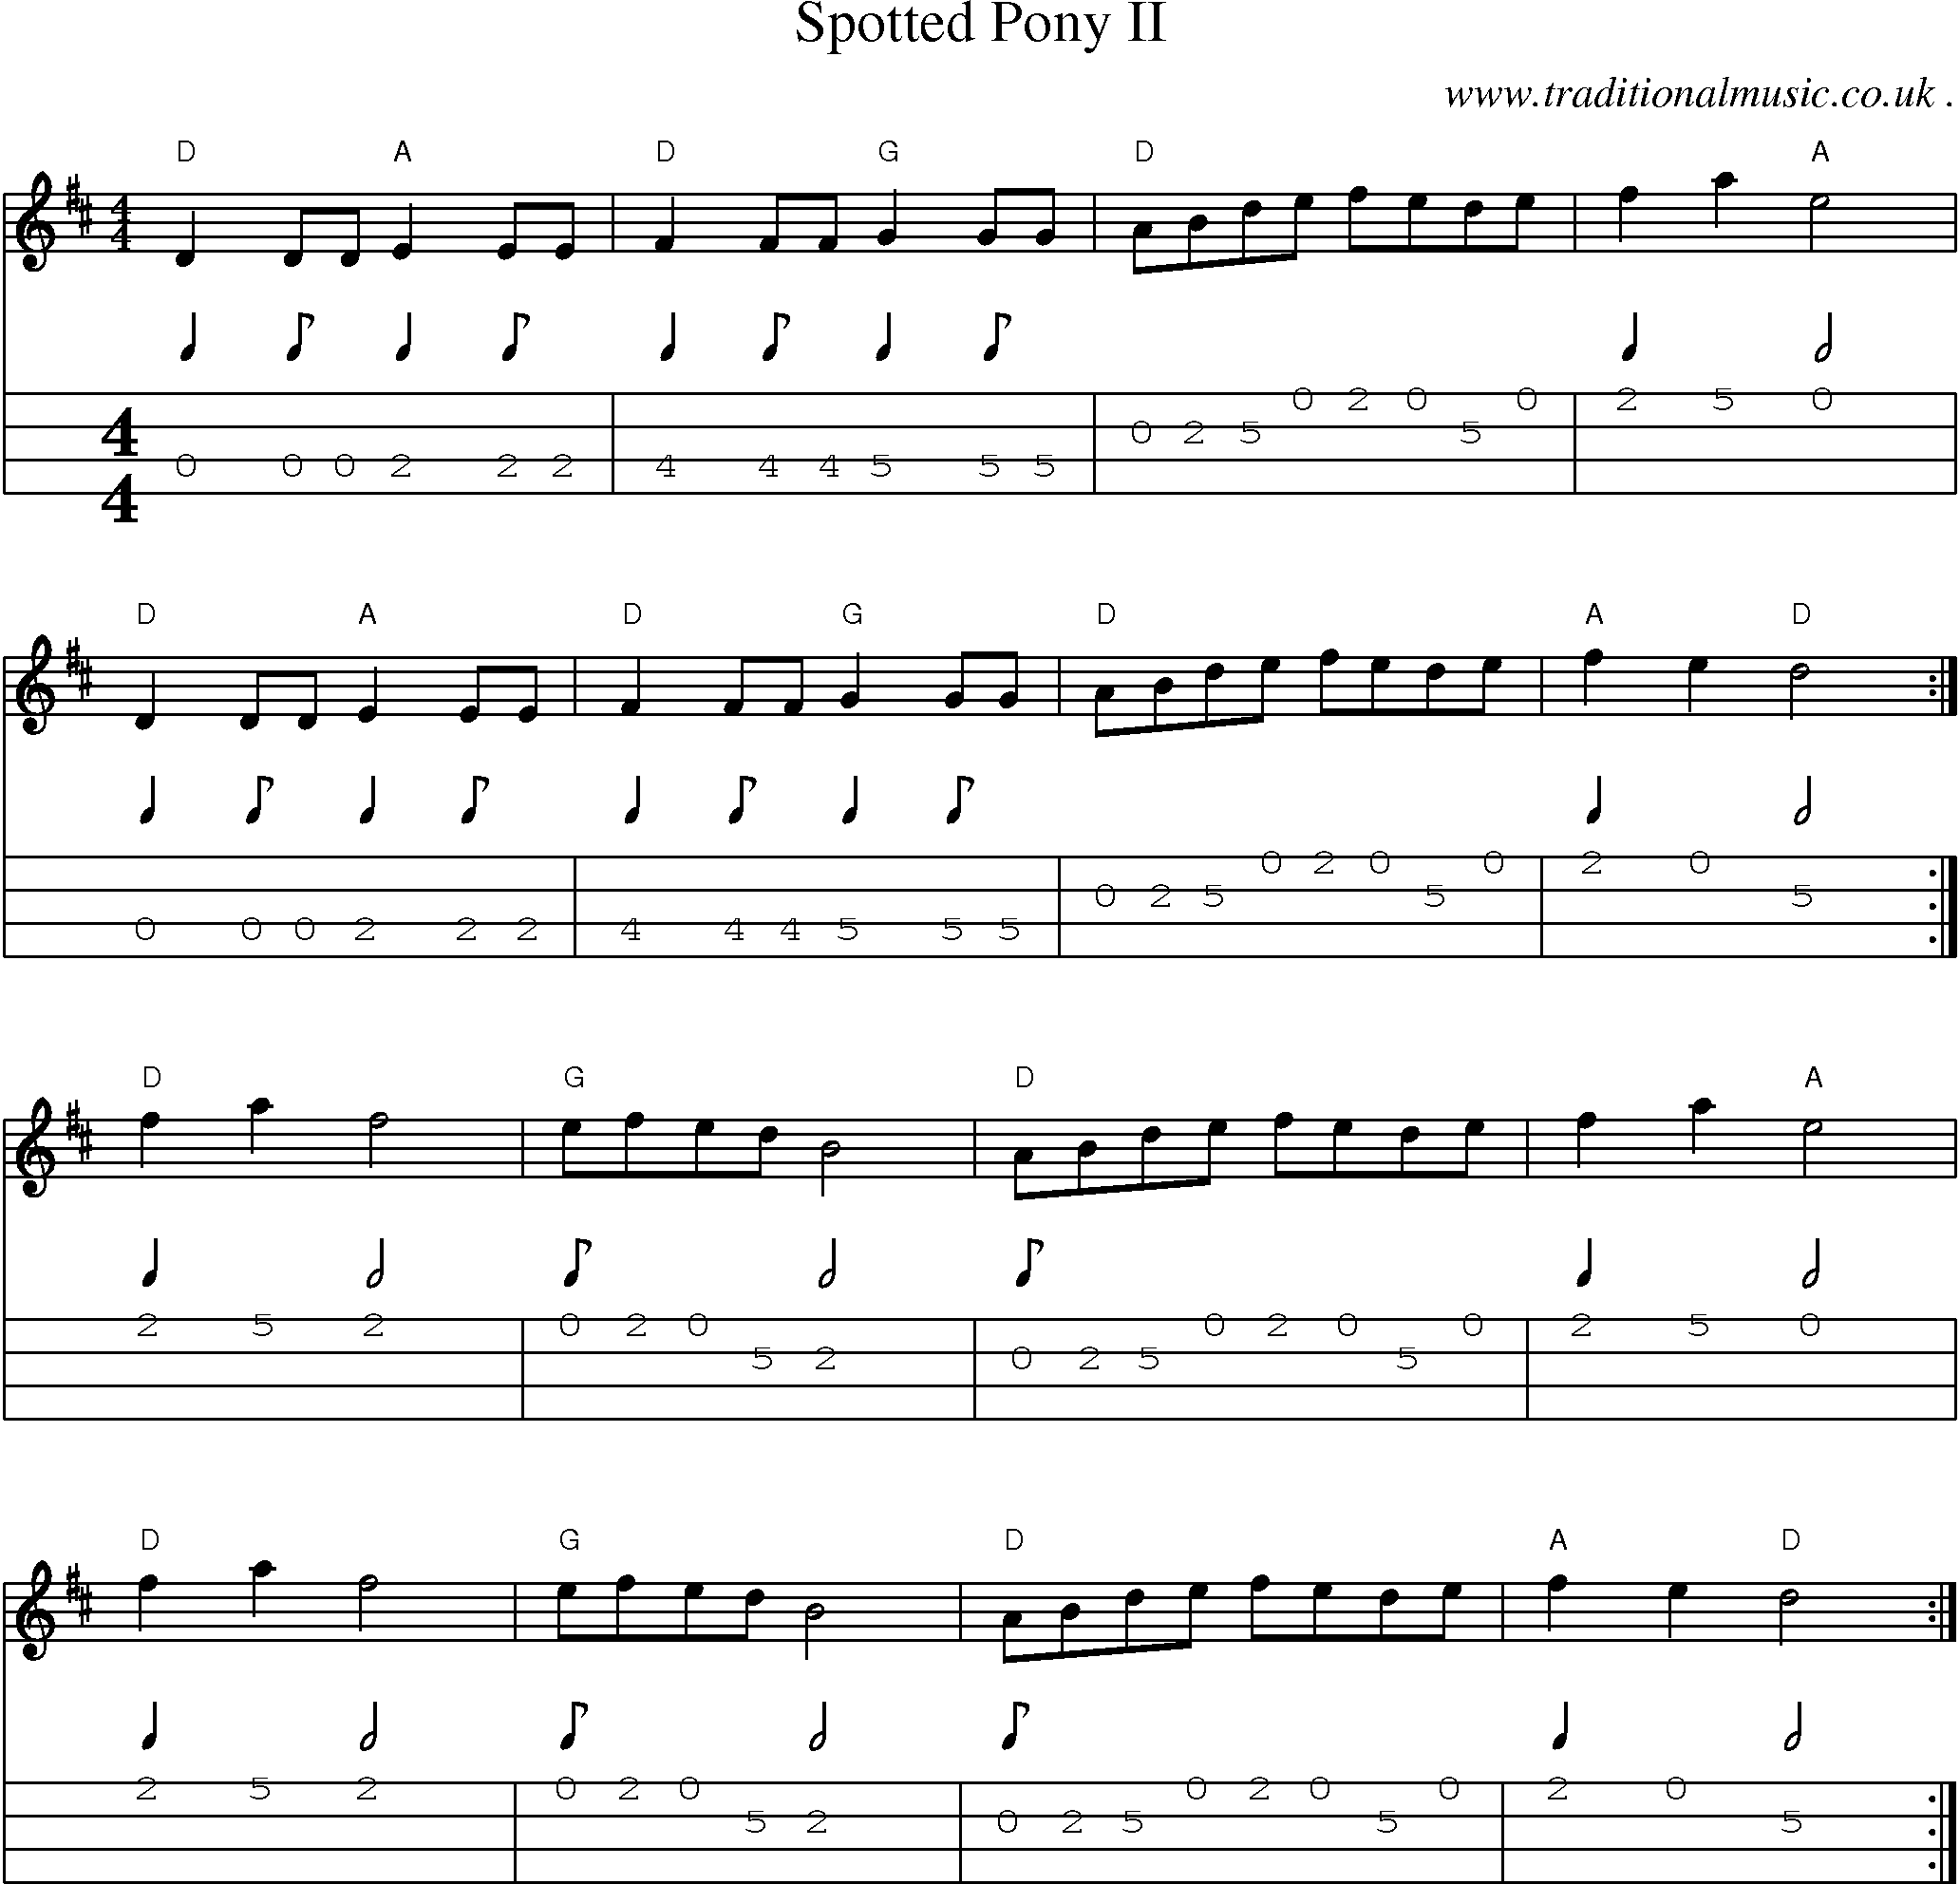 Music Score and Guitar Tabs for Spotted Pony Ii